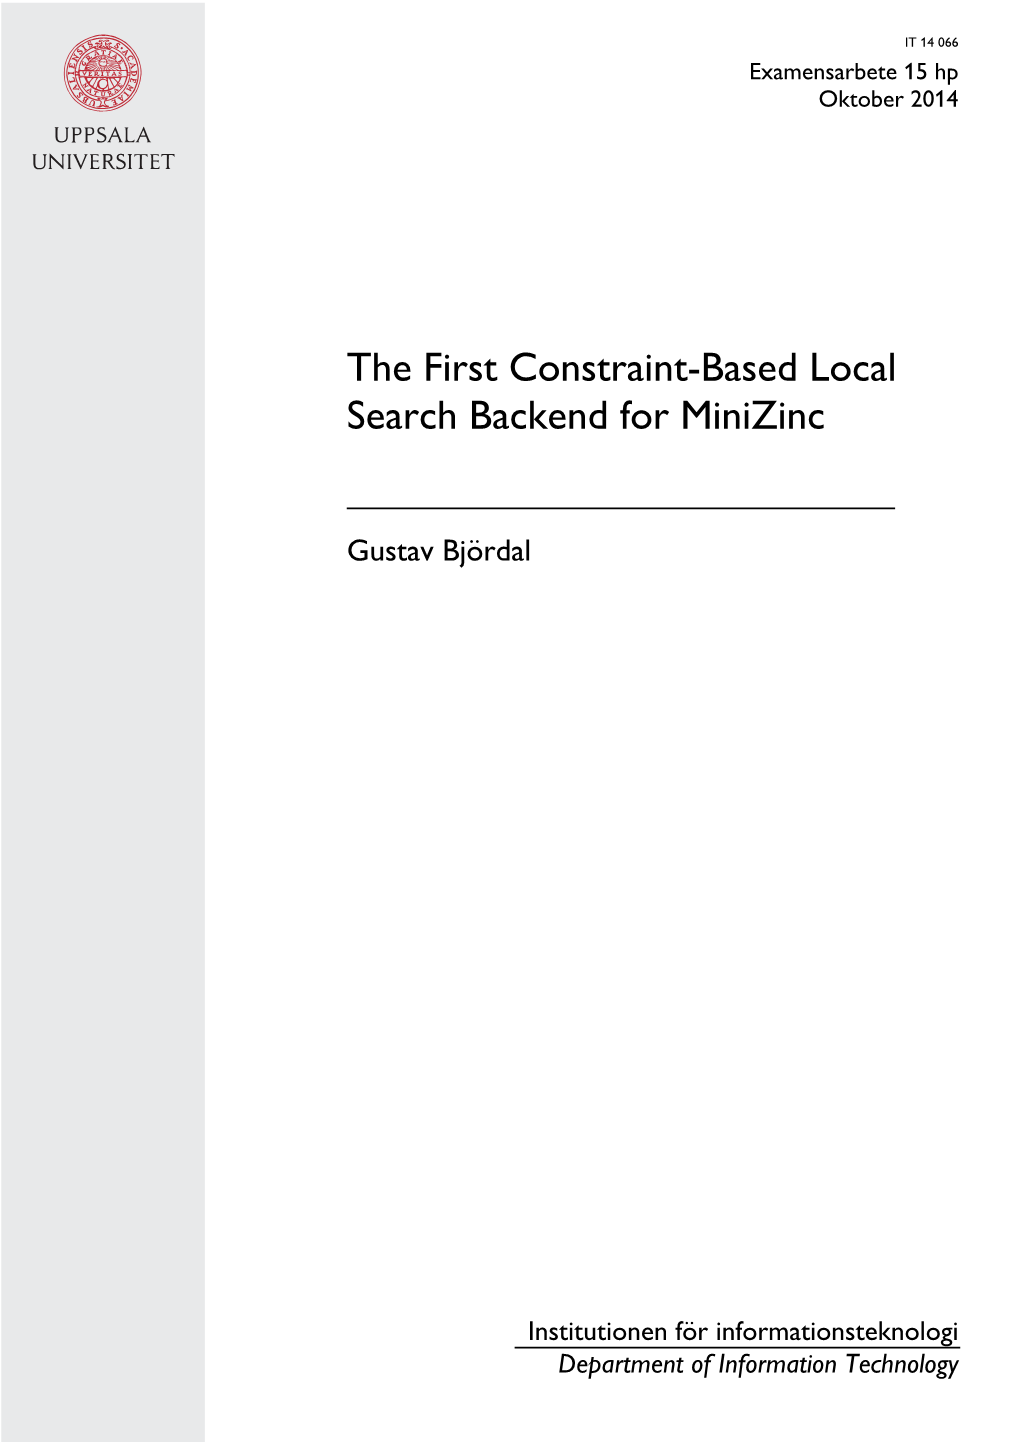 The First Constraint-Based Local Search Backend for Minizinc